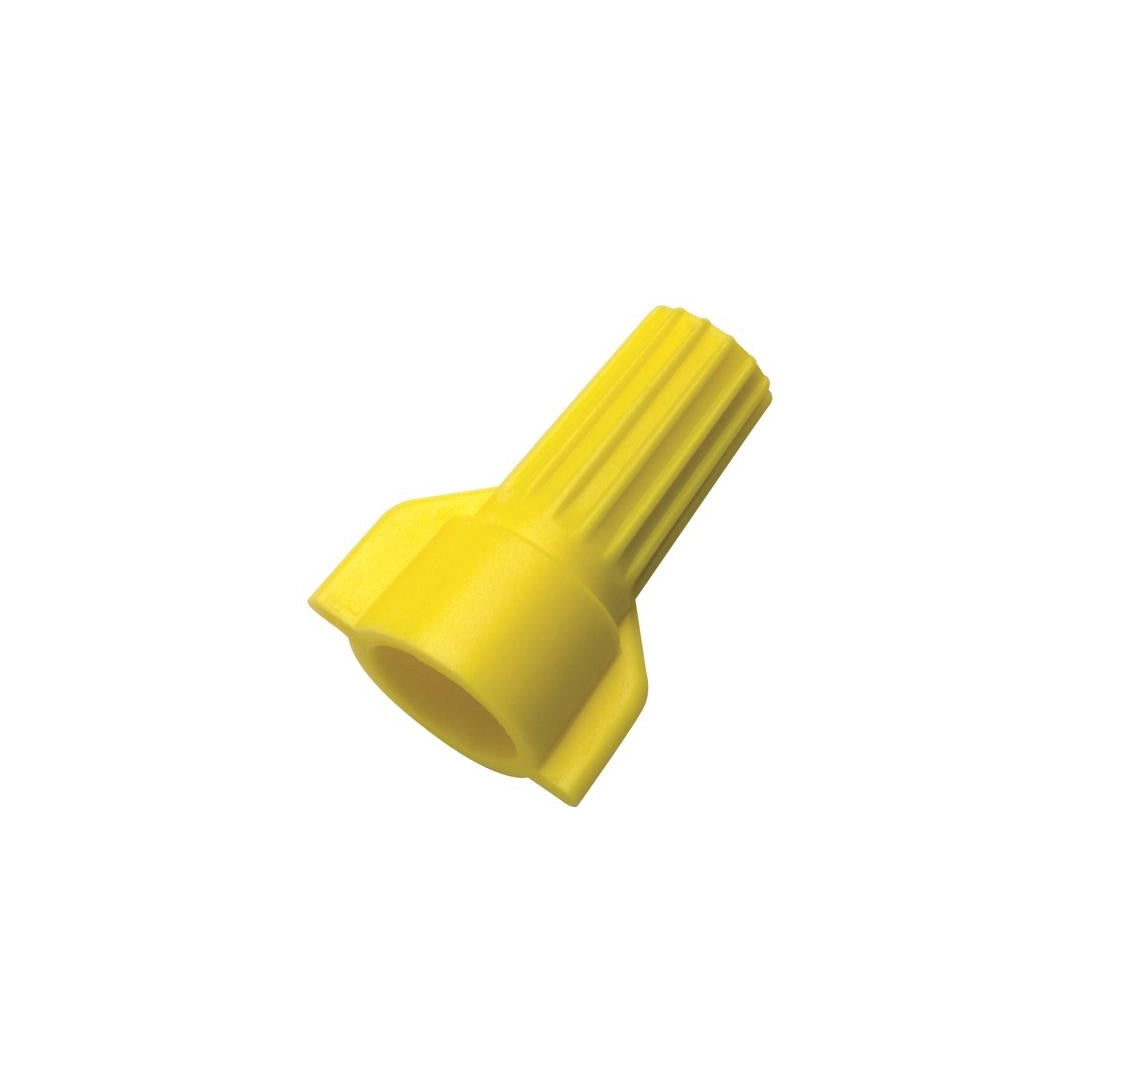 Ideal 773340 Copper Wire Connectors, Yellow